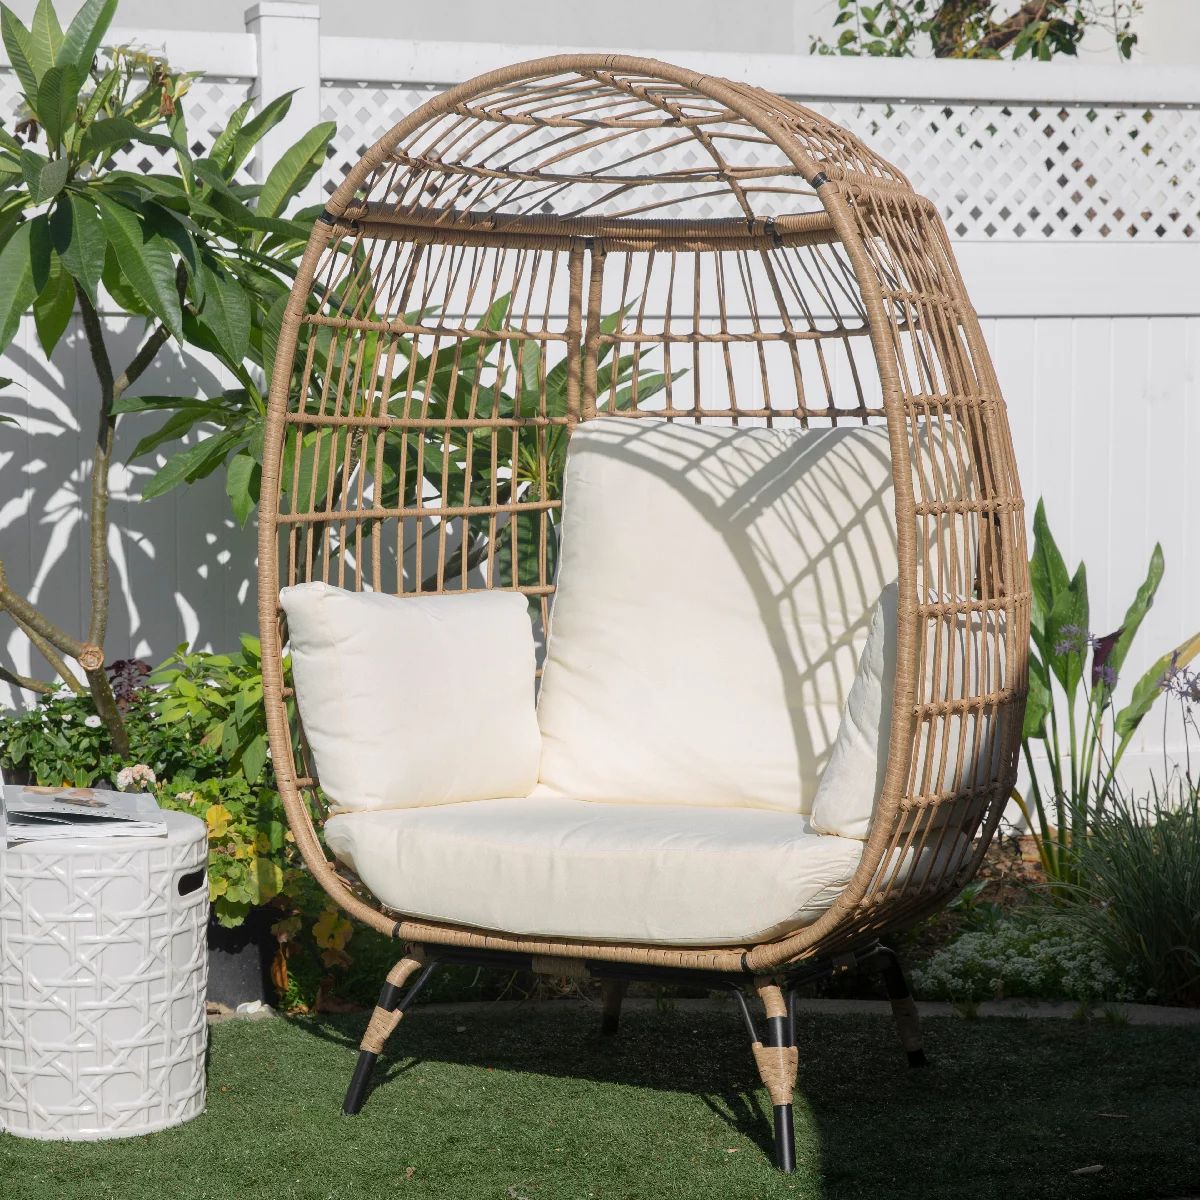 Oversized Wicker Egg Chair Patio Lounger for Indoor/Outdoor W/ Cushion (Beige/White) | Walmart (US)